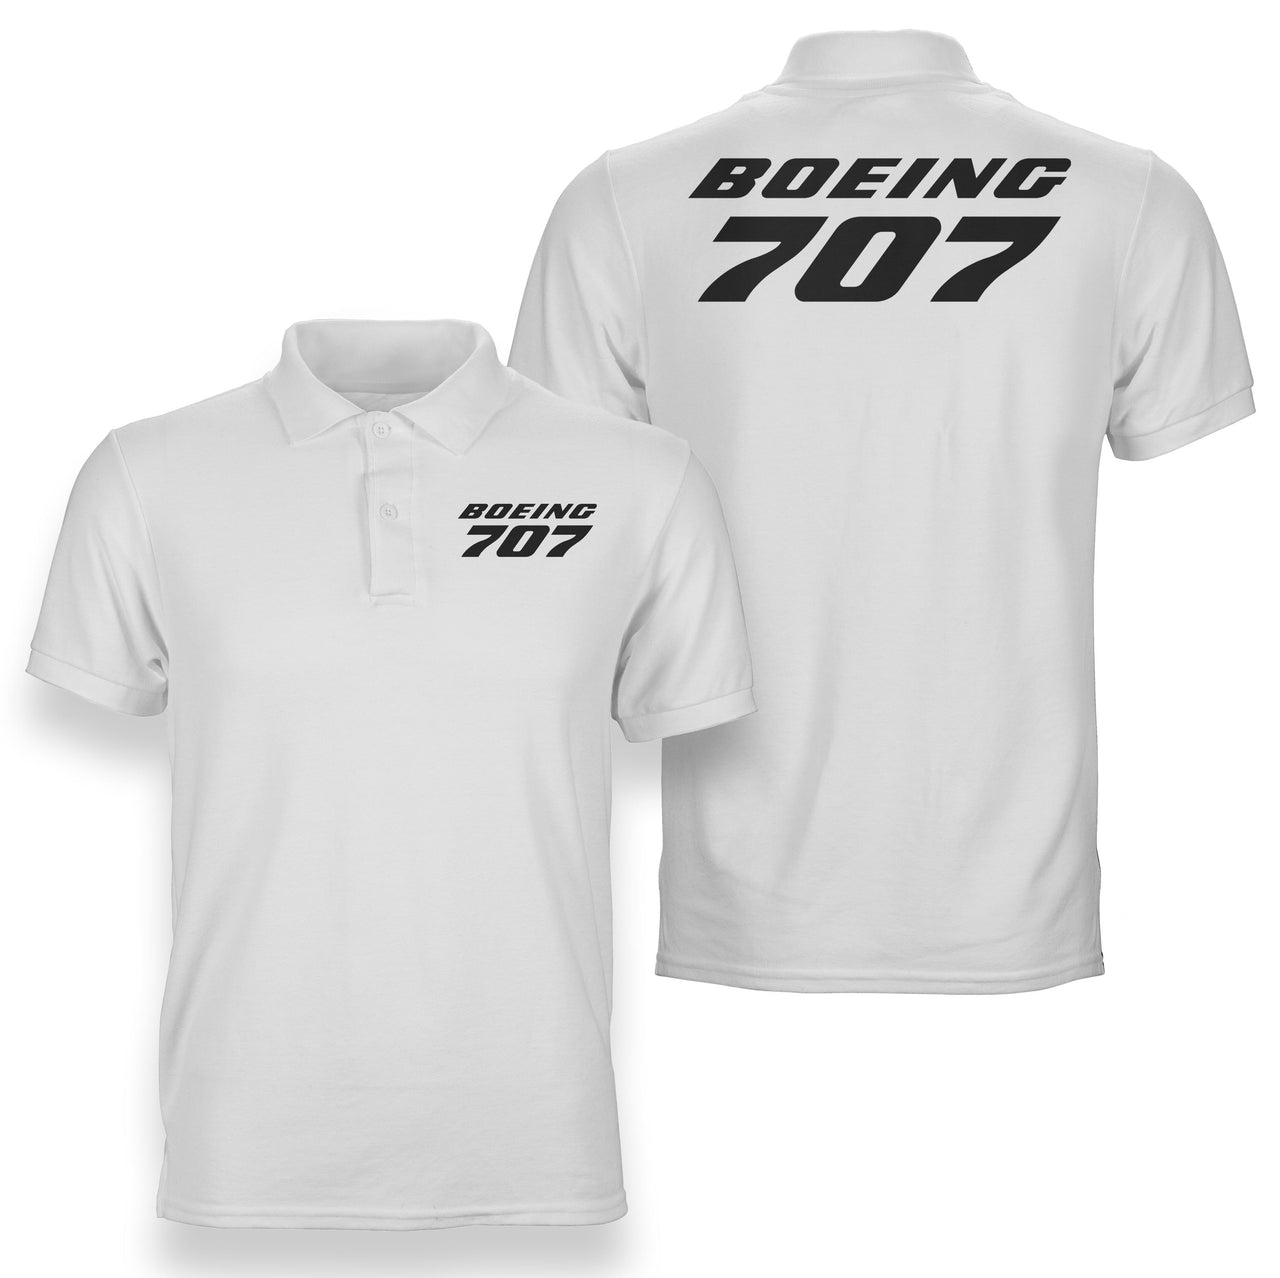 Boeing 707 & Text Designed Double Side Polo T-Shirts